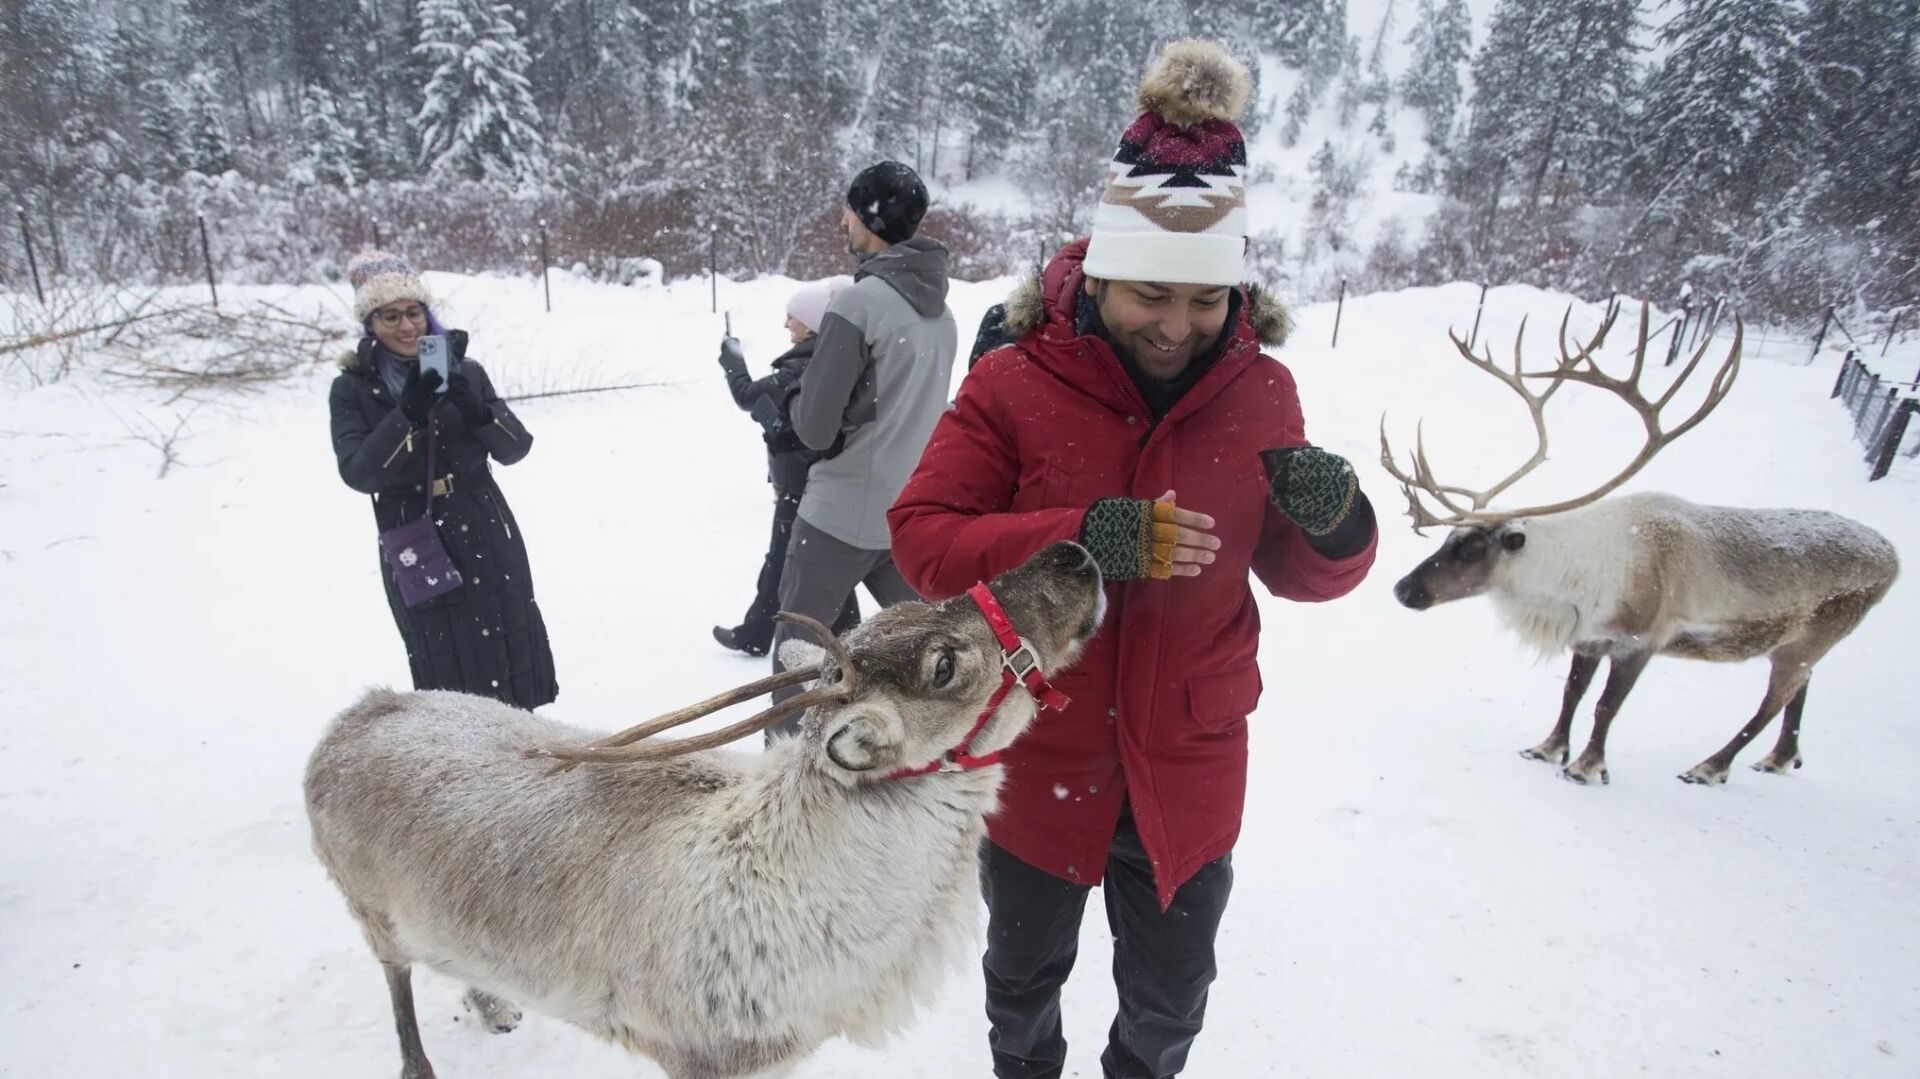   
																Leavenworth Reindeer Farm becomes hit attraction, plans 360-degree dome 
															 